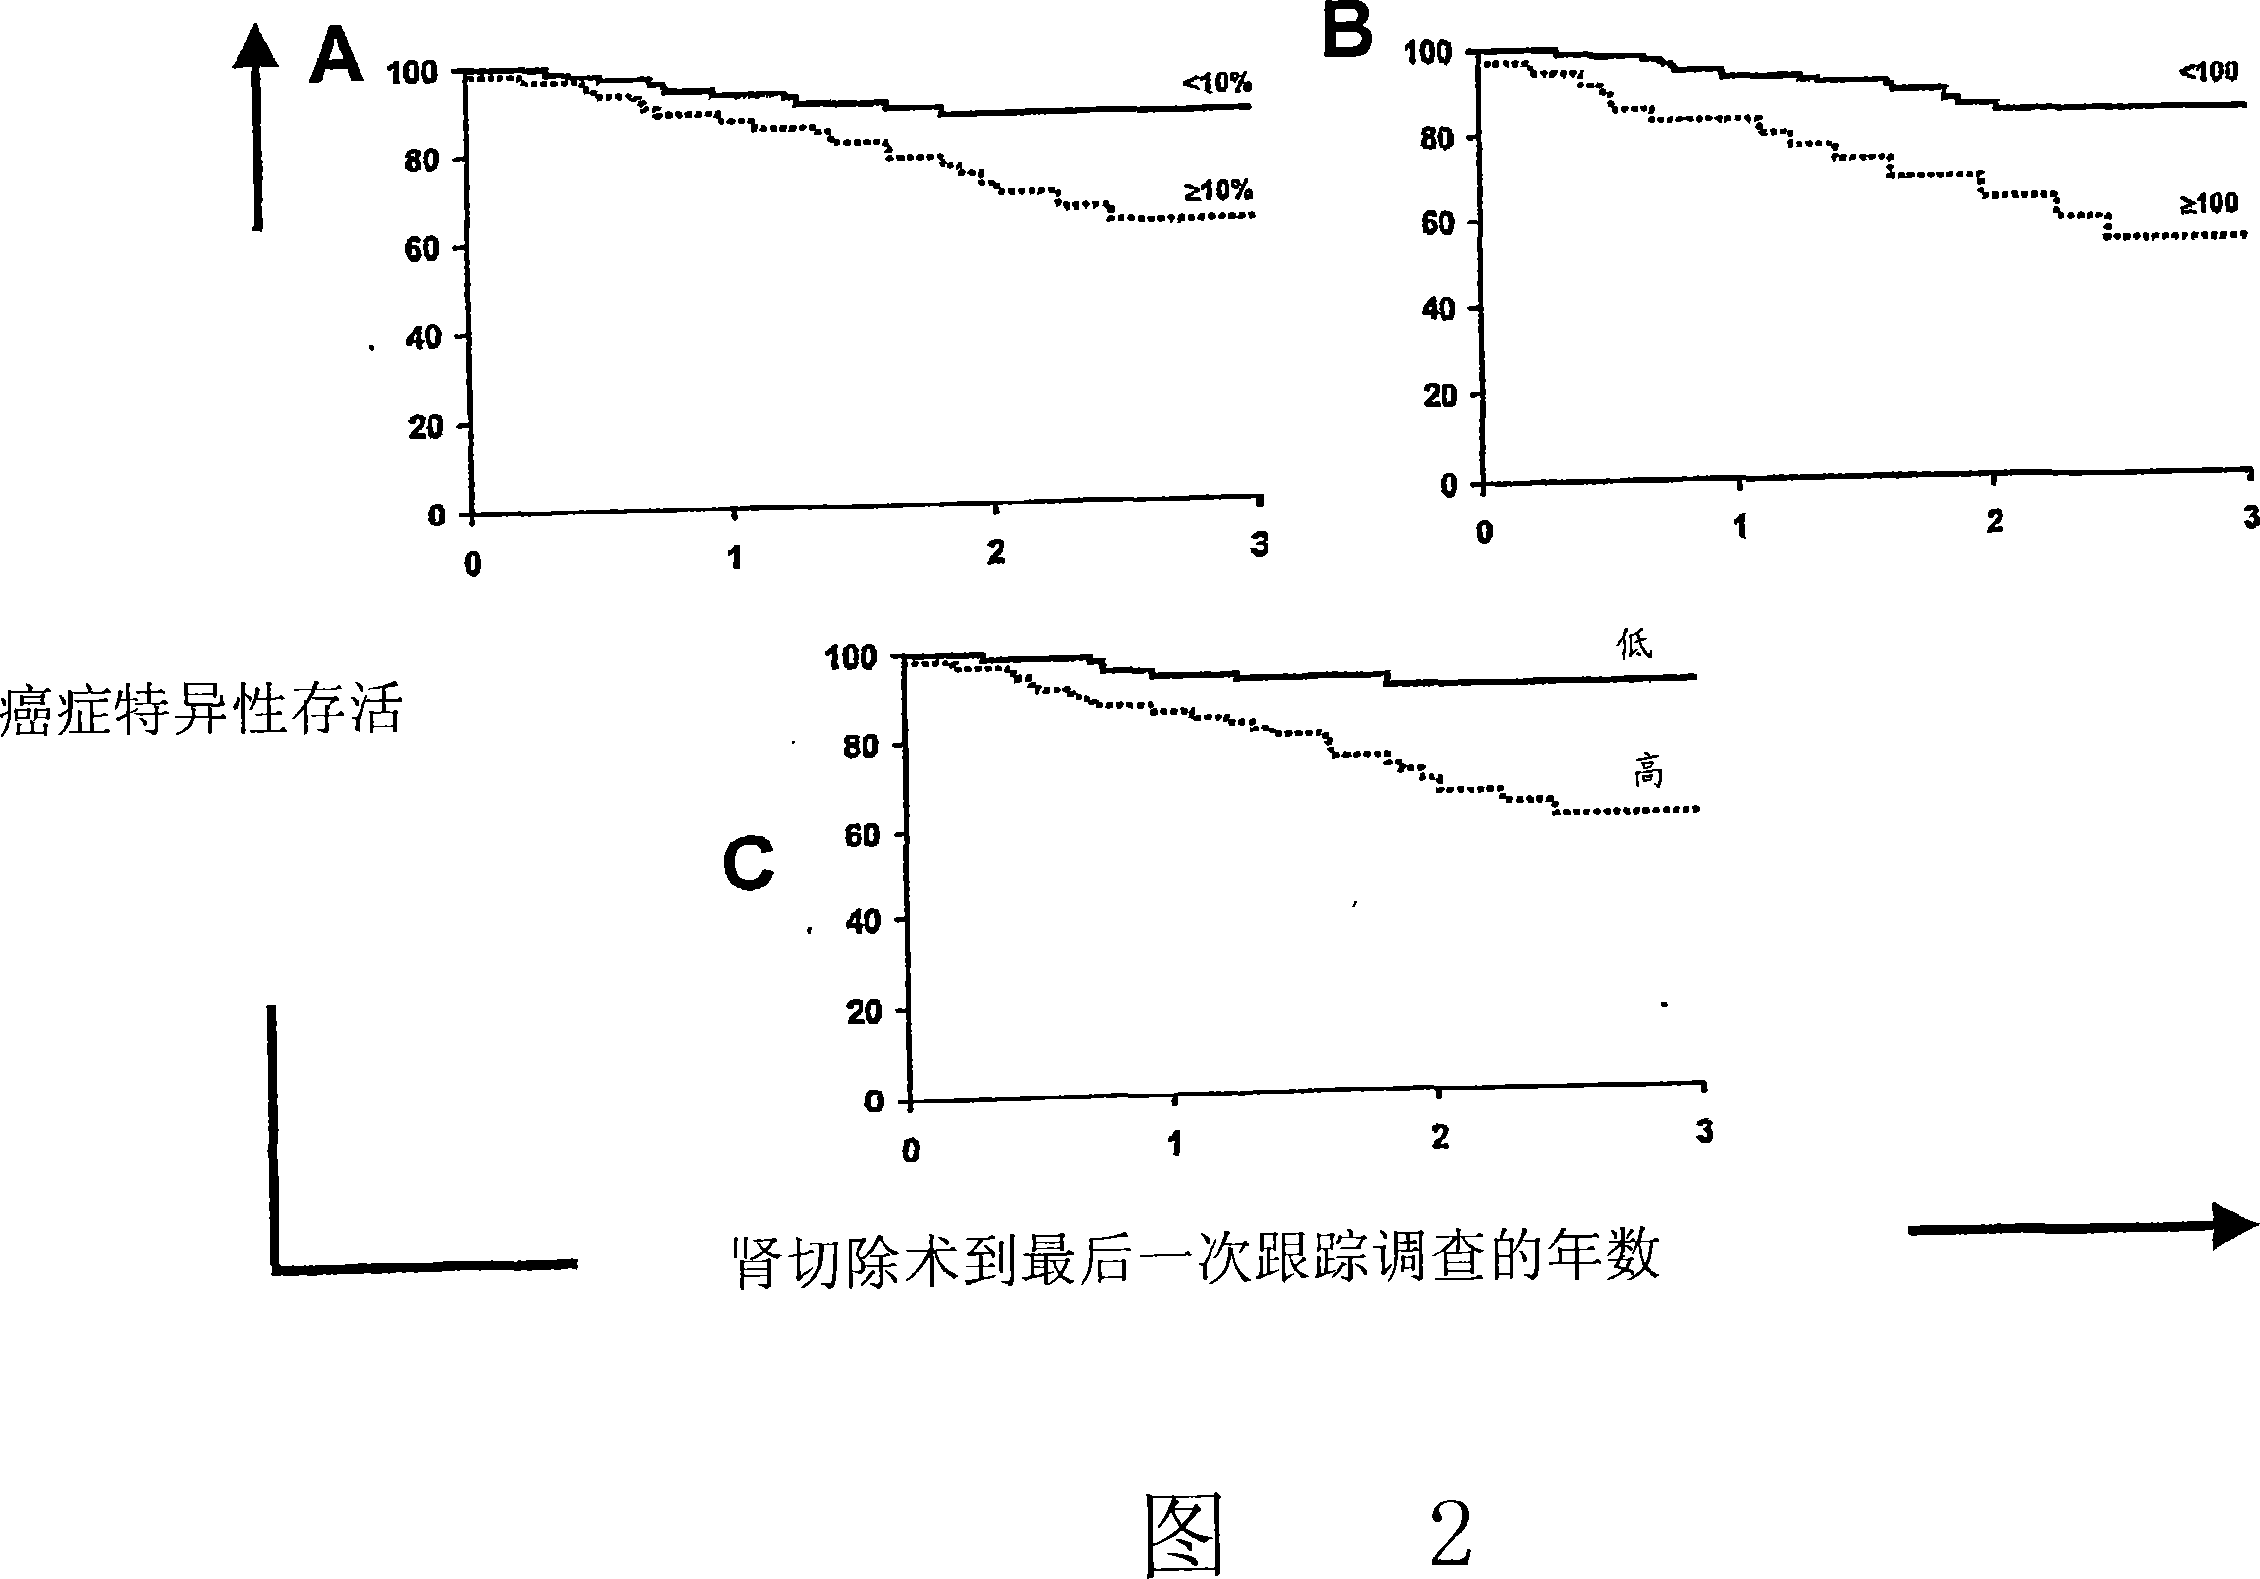 B7-h1 and methods of diagnosis, prognosis, and treatment of cancer